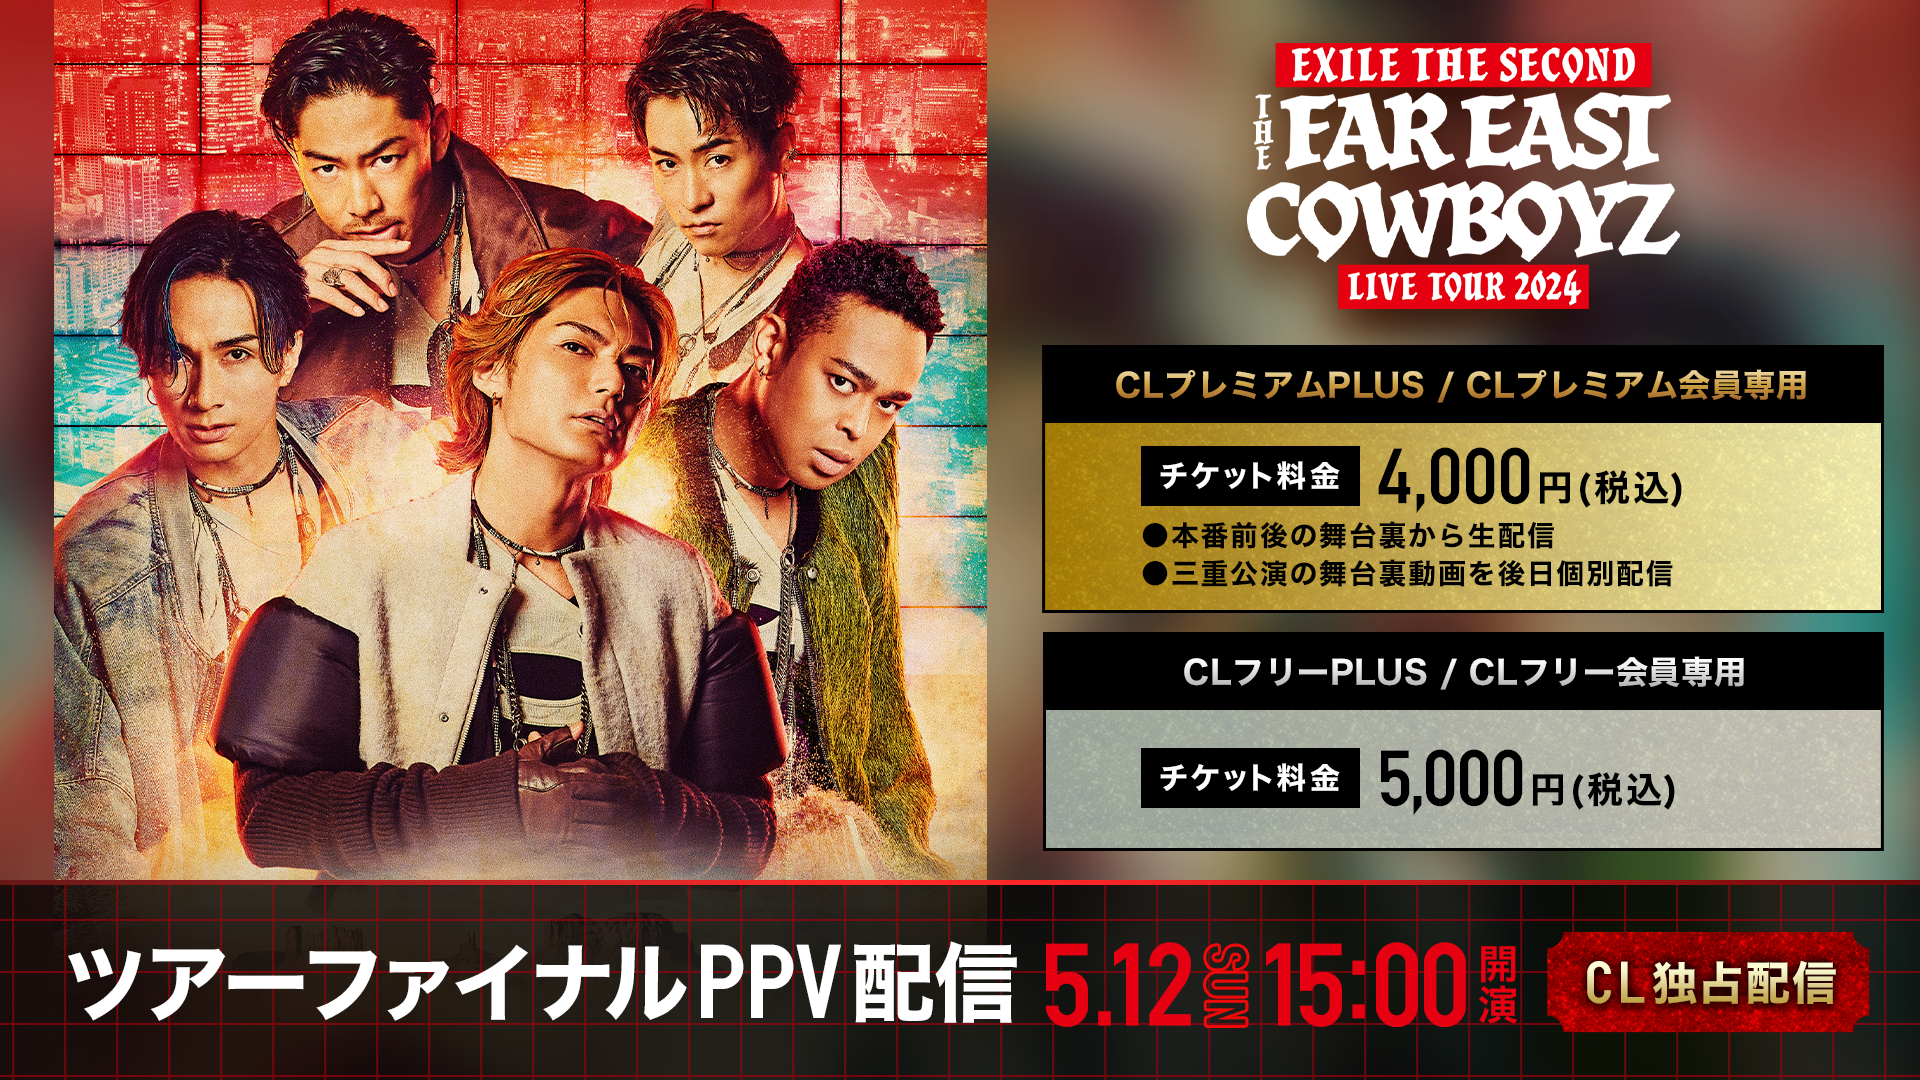 EXILE THE SECOND LIVE TOUR 2024 “THE FAR EAST COWBOYZ」 ファイナル公演 PPV生配信決定！ |  CL - LDH所属アーティストの動画・MV視聴サービス